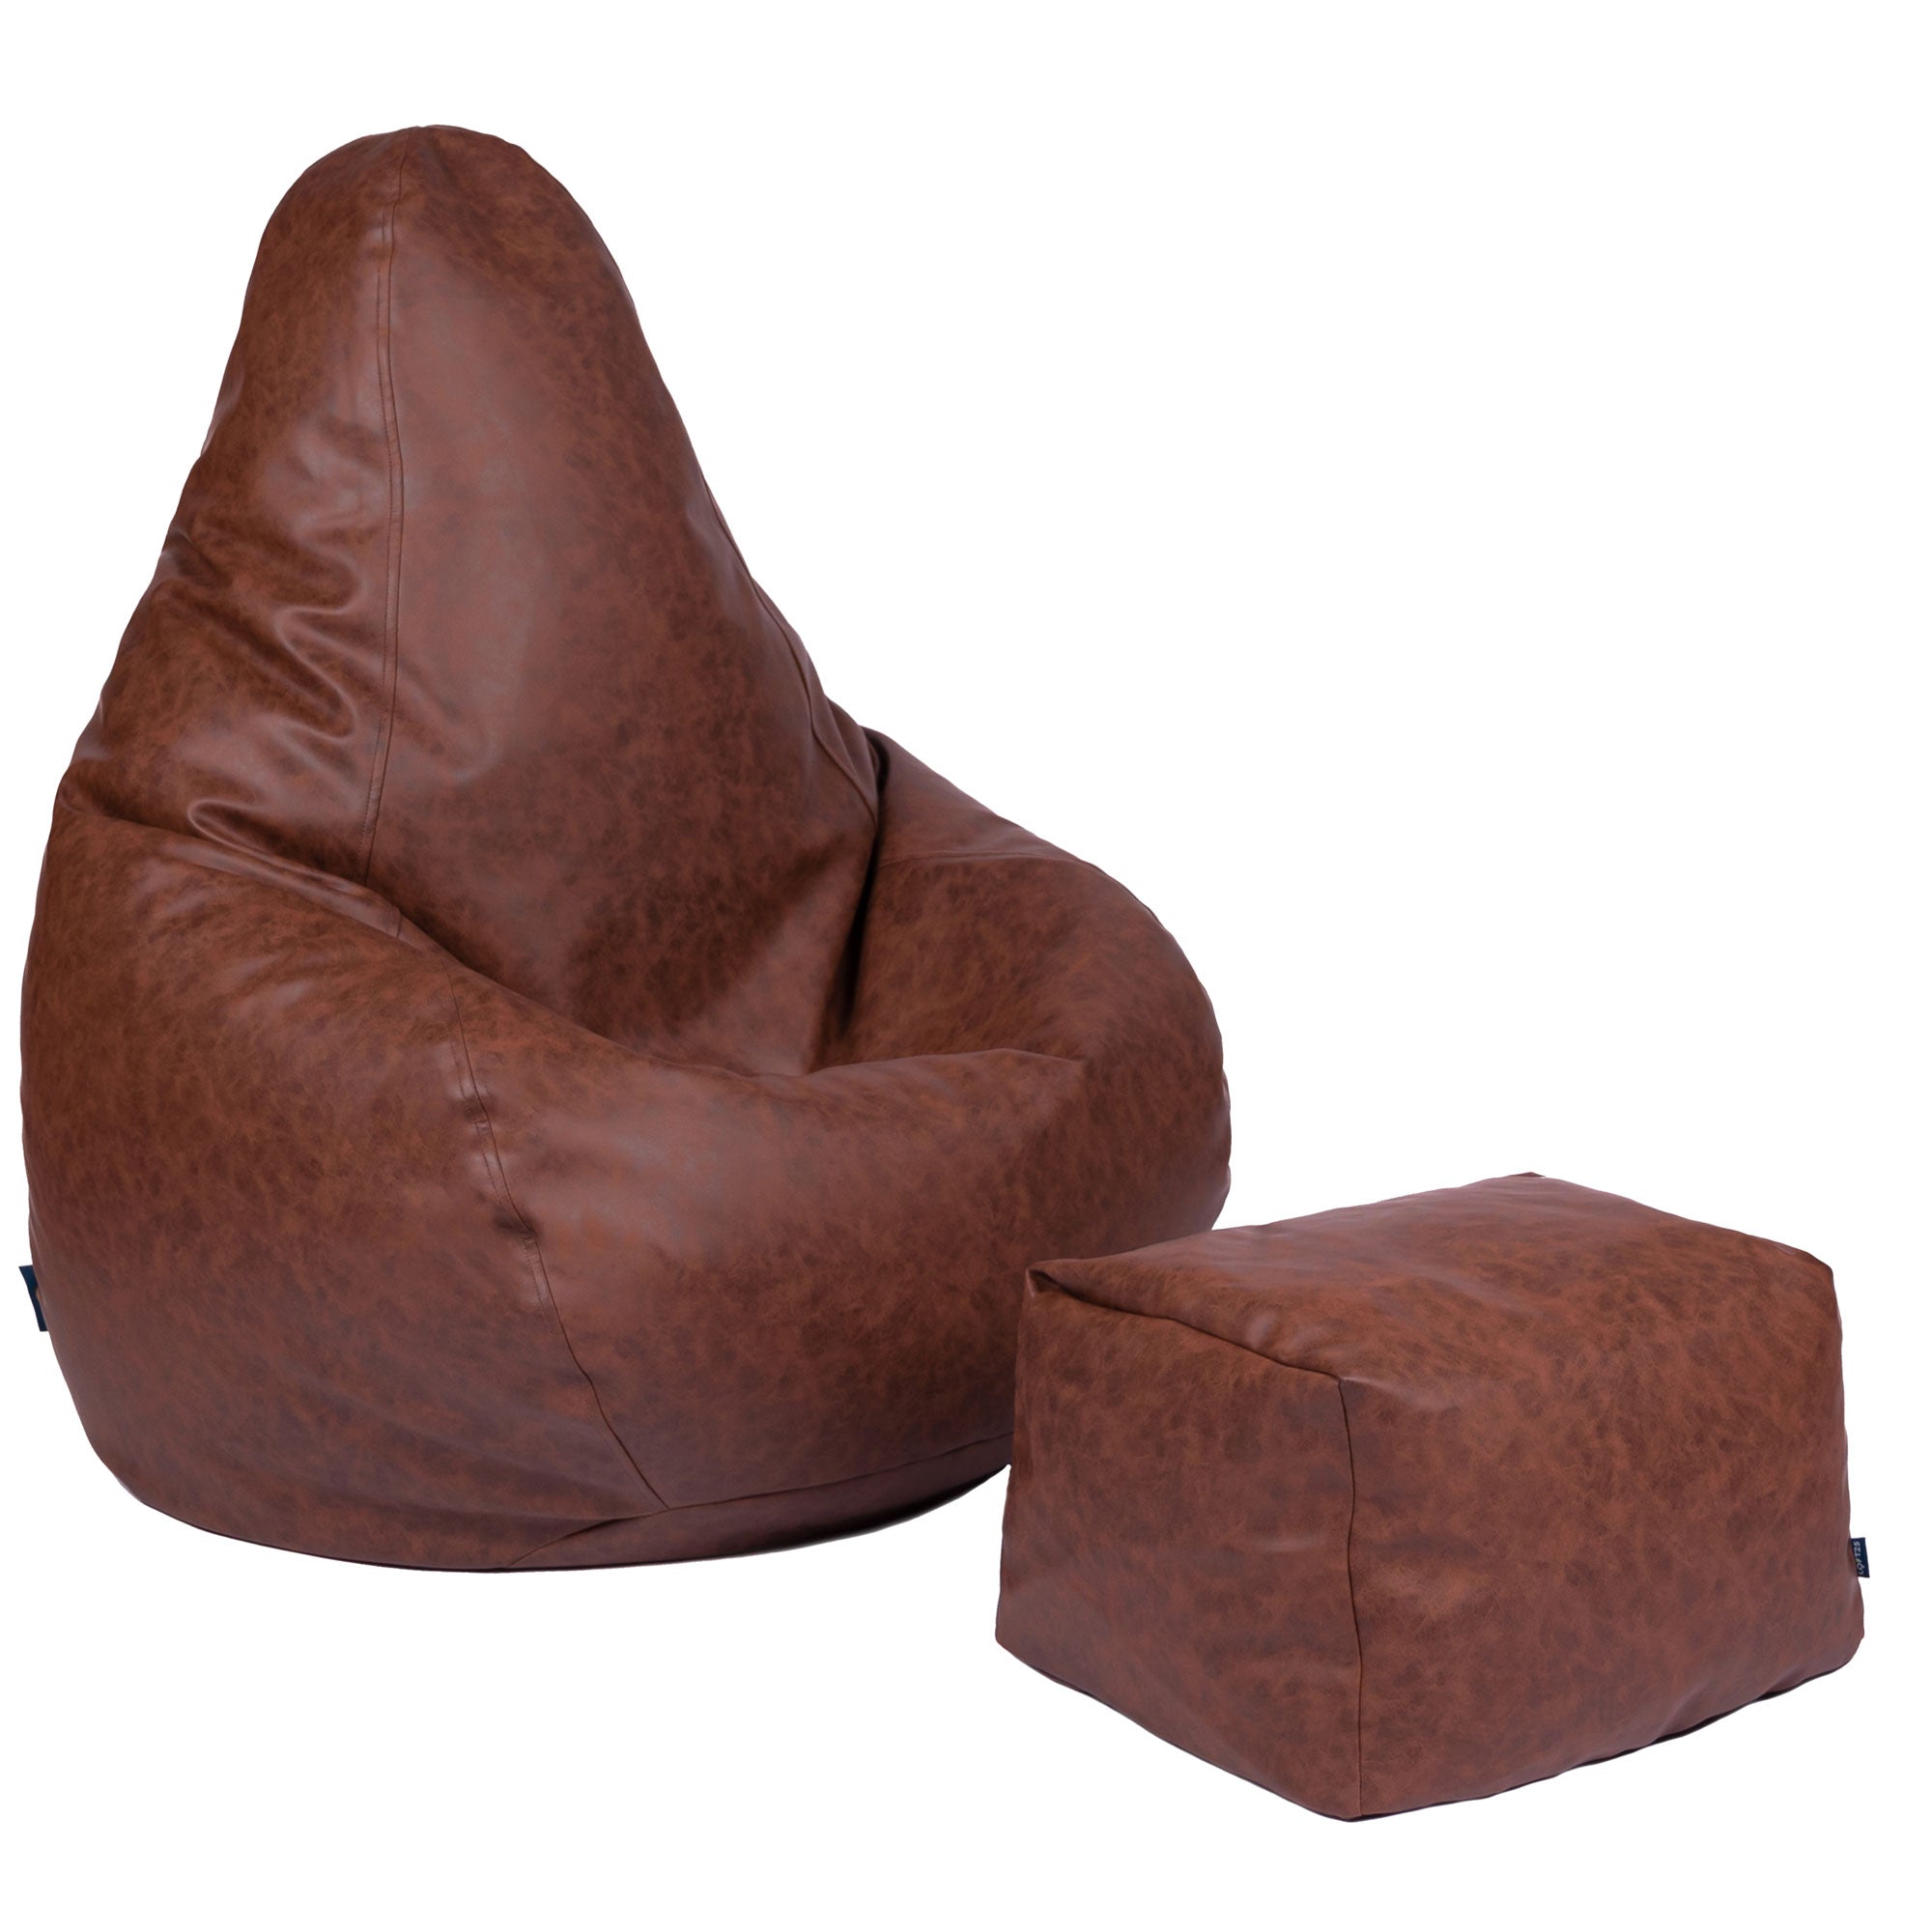 Luxurious High Back Artificial leather Bean Bag with footstool